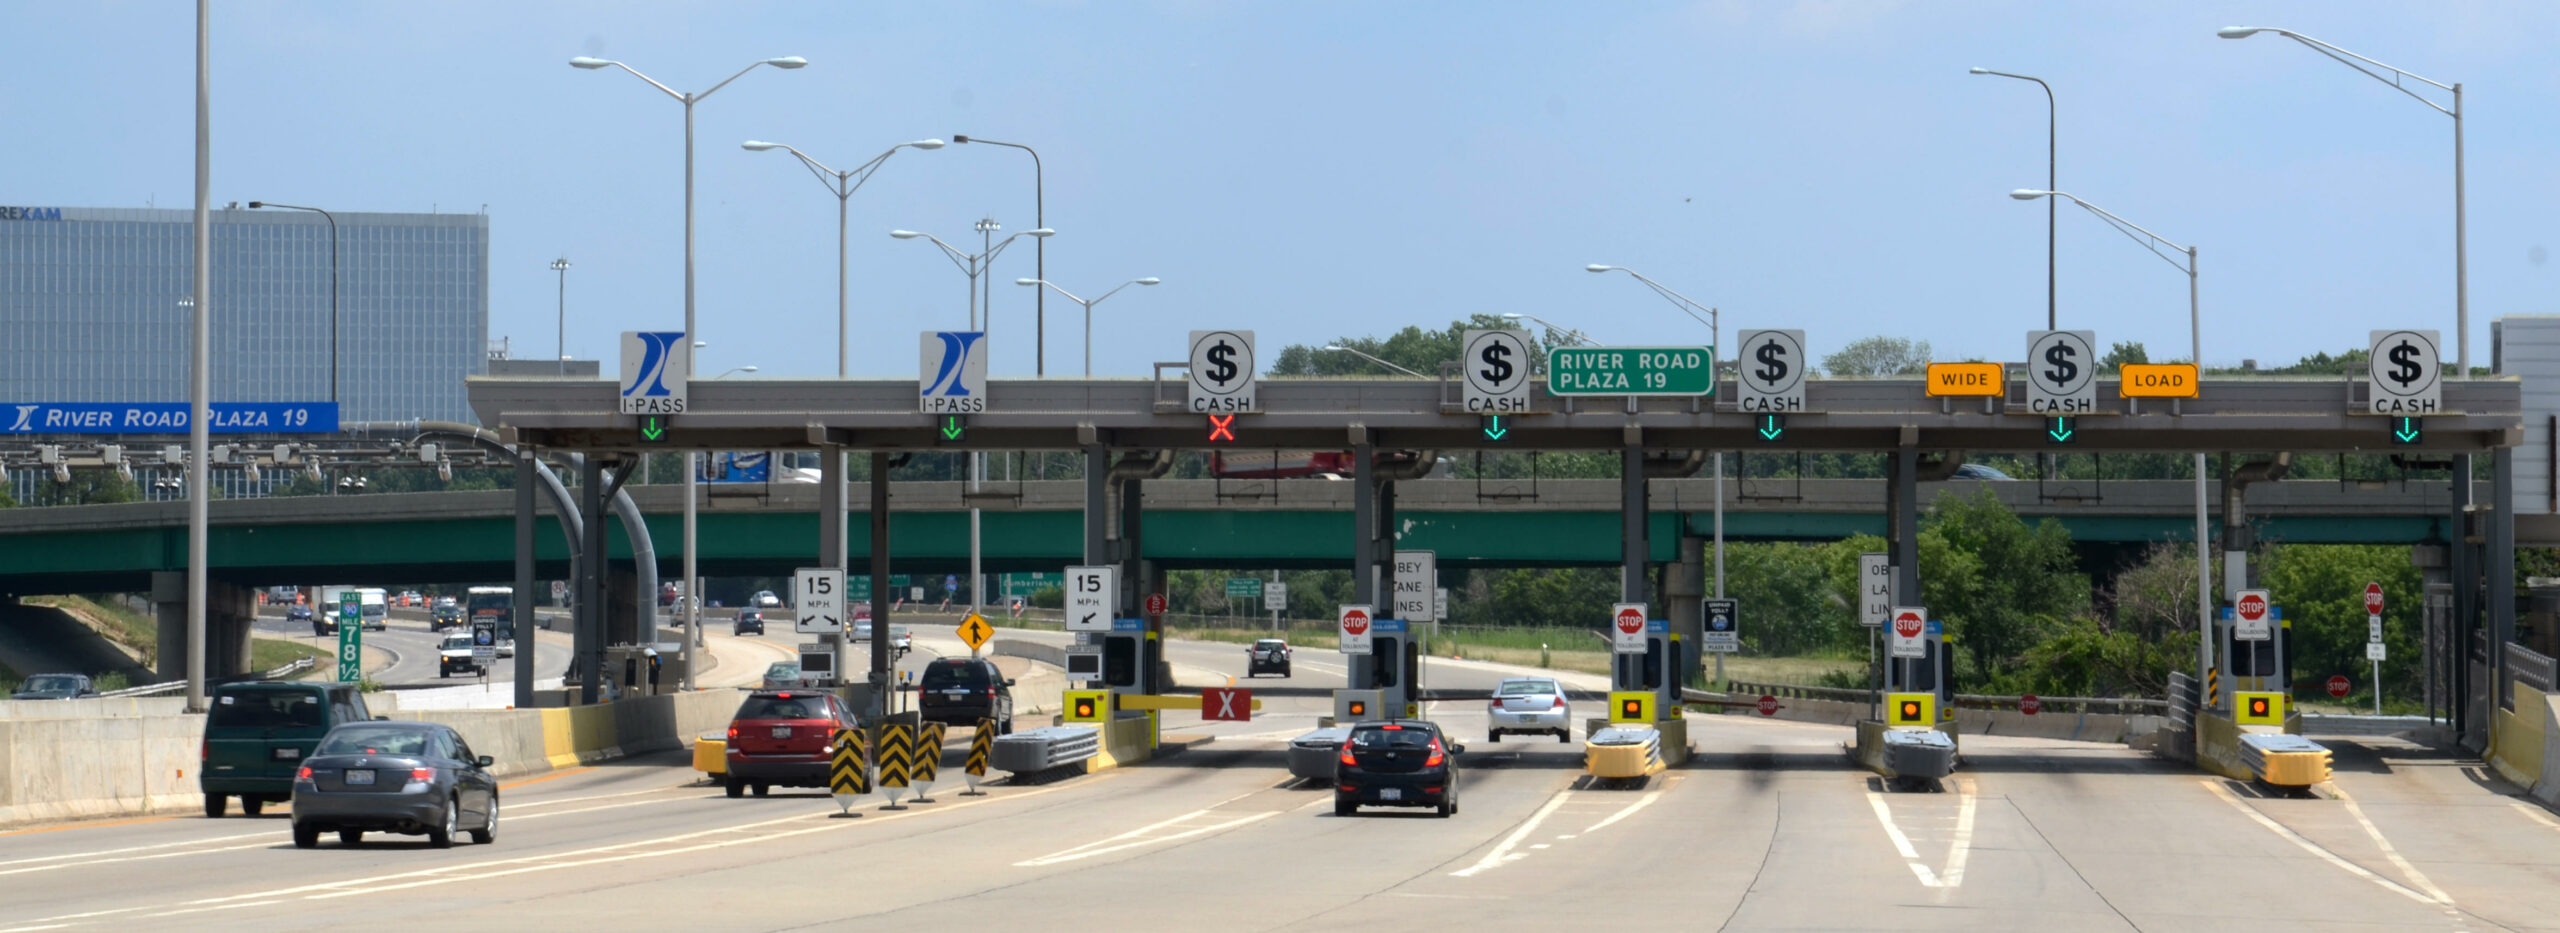 CHICAGO – JULY 18: Toll plaza near Chicago, on July 18, 2013. Eighty six percent of Illinois Tollway drivers use I-PASS transponders, which allow them to drive through open road tolling lanes.